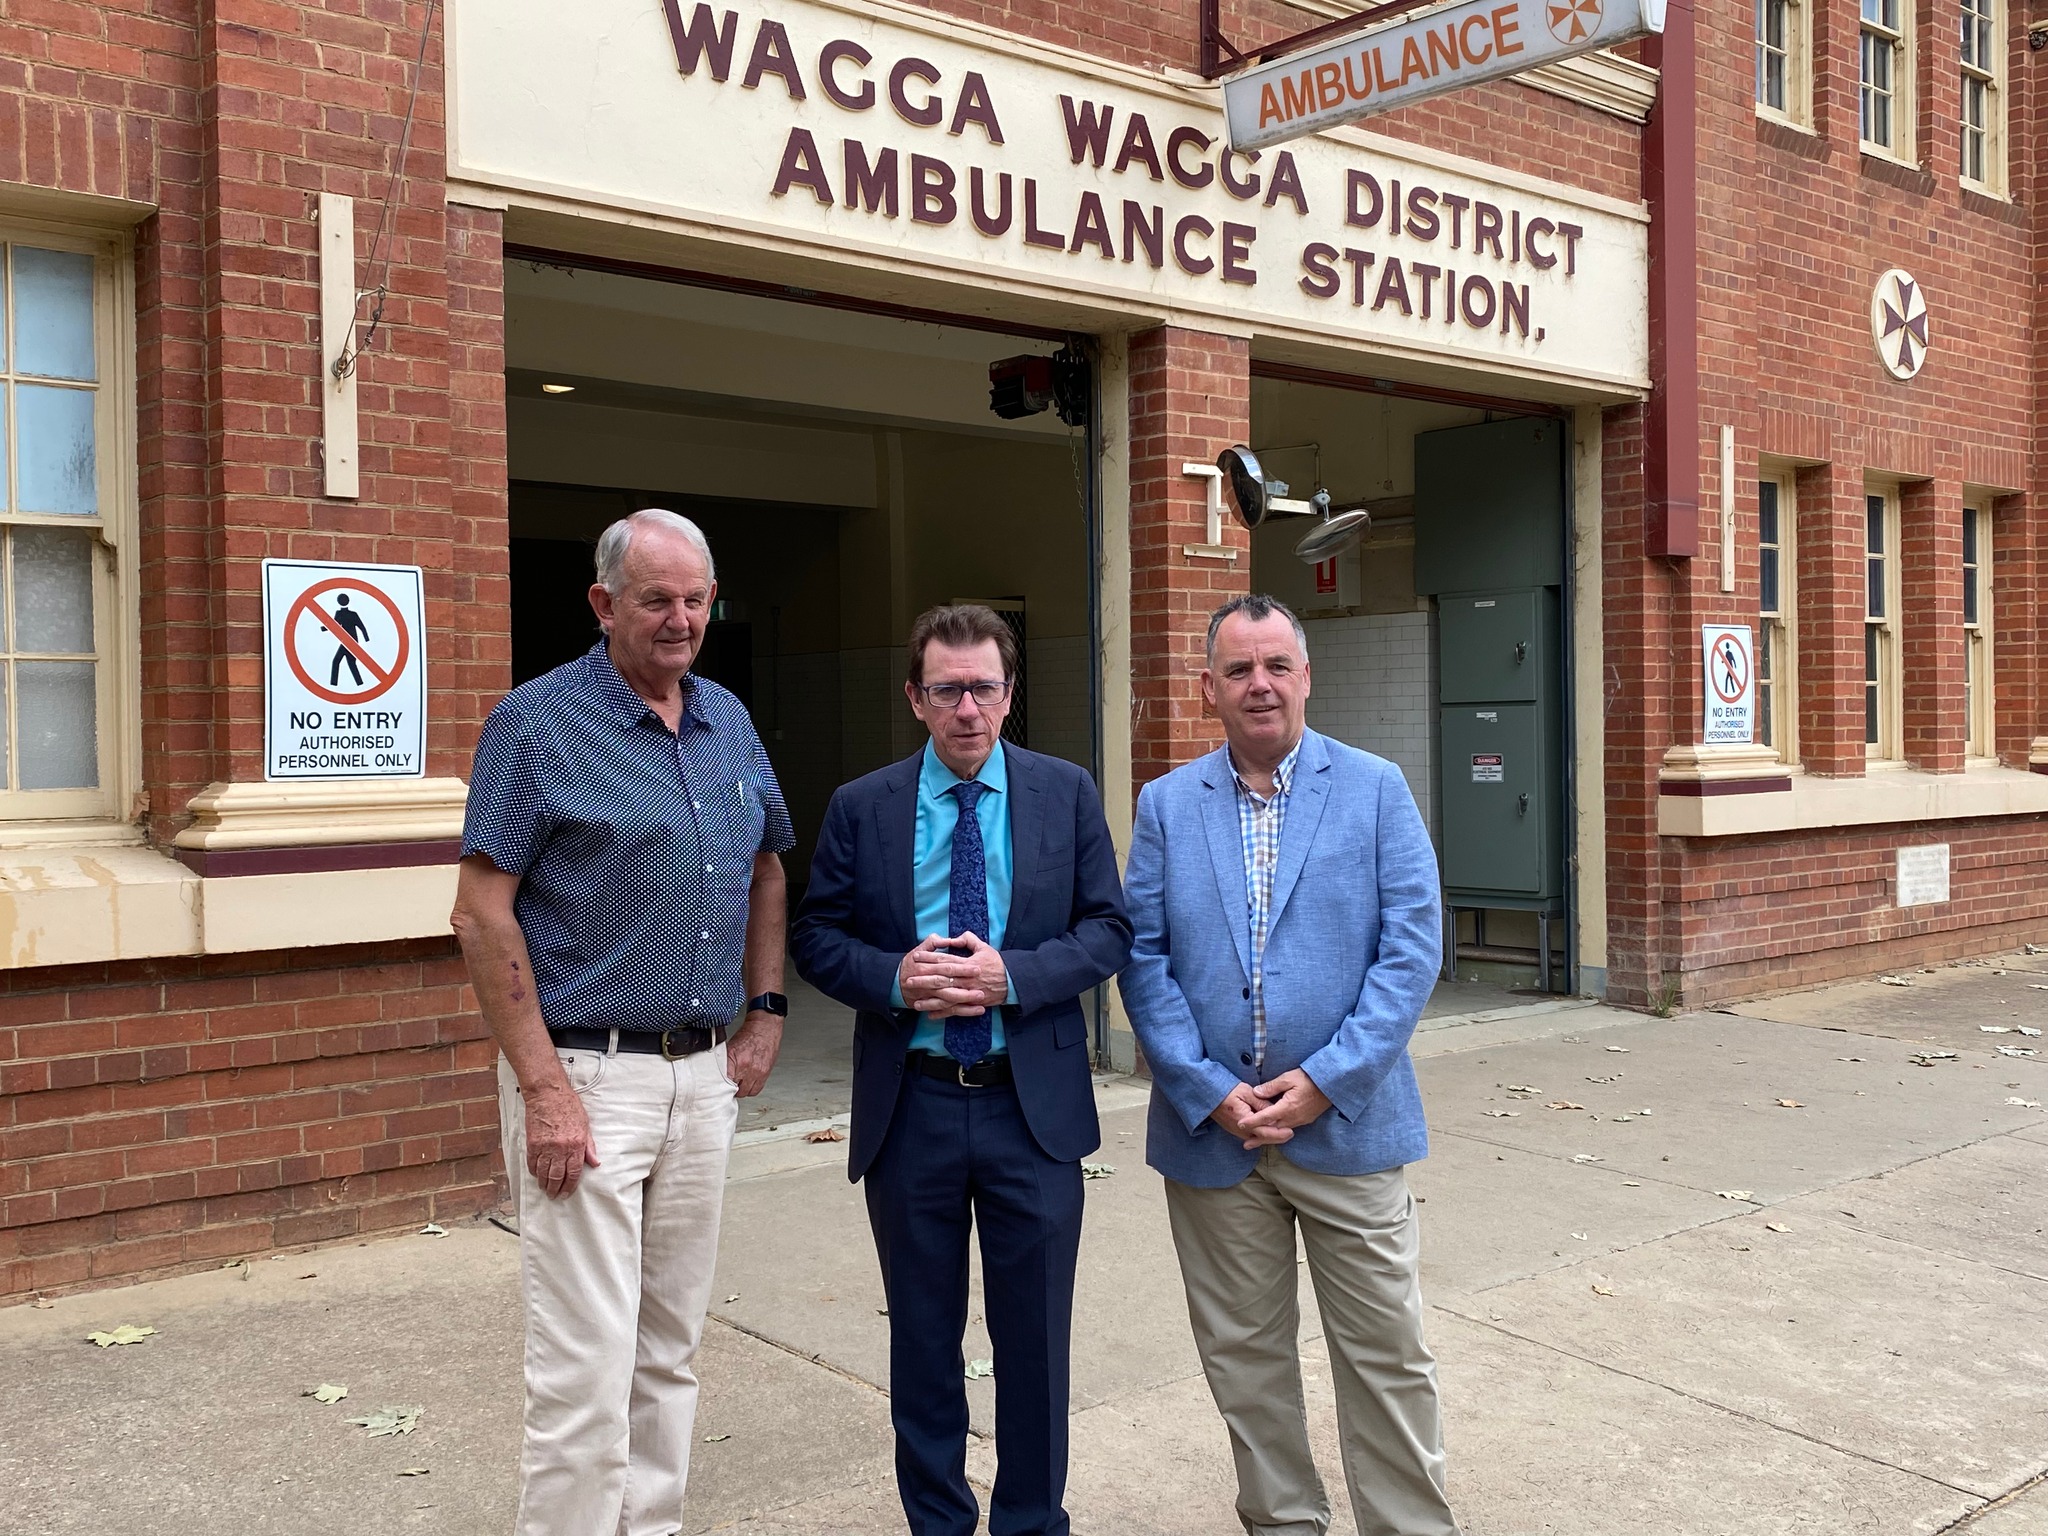 Old Wagga Ambulance Station to be returned to its rightful owners